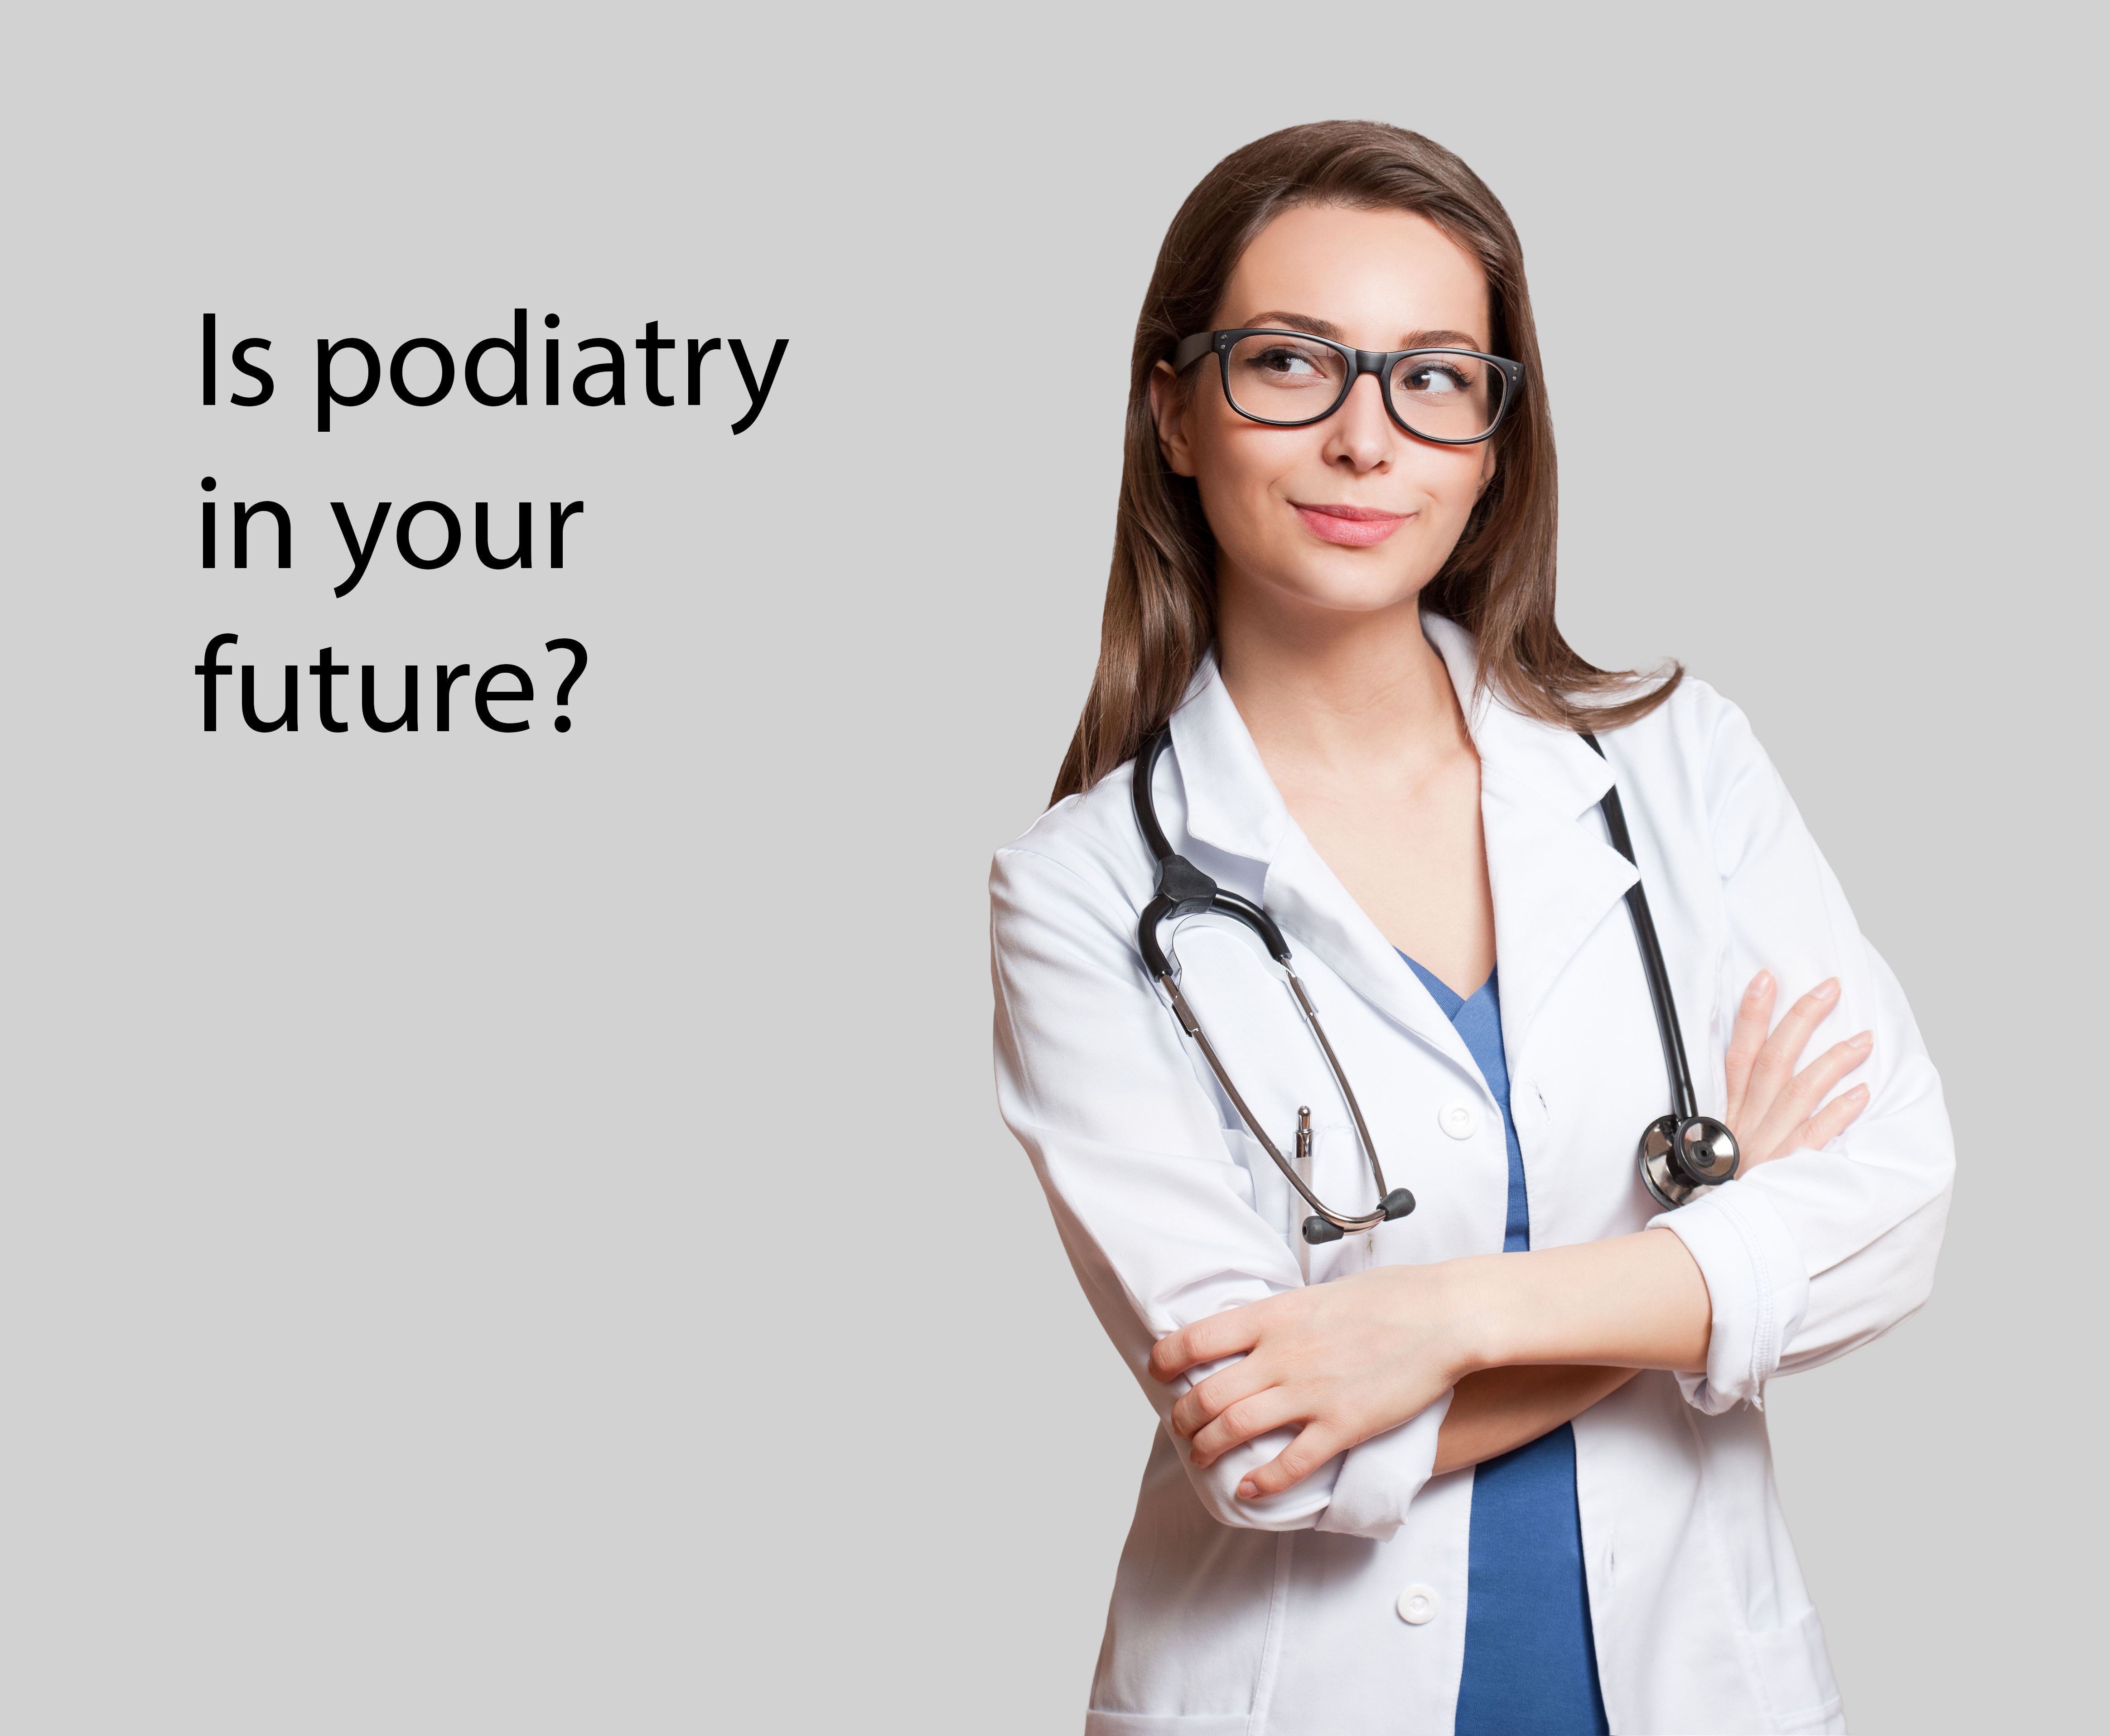 Is podiatry in your future?